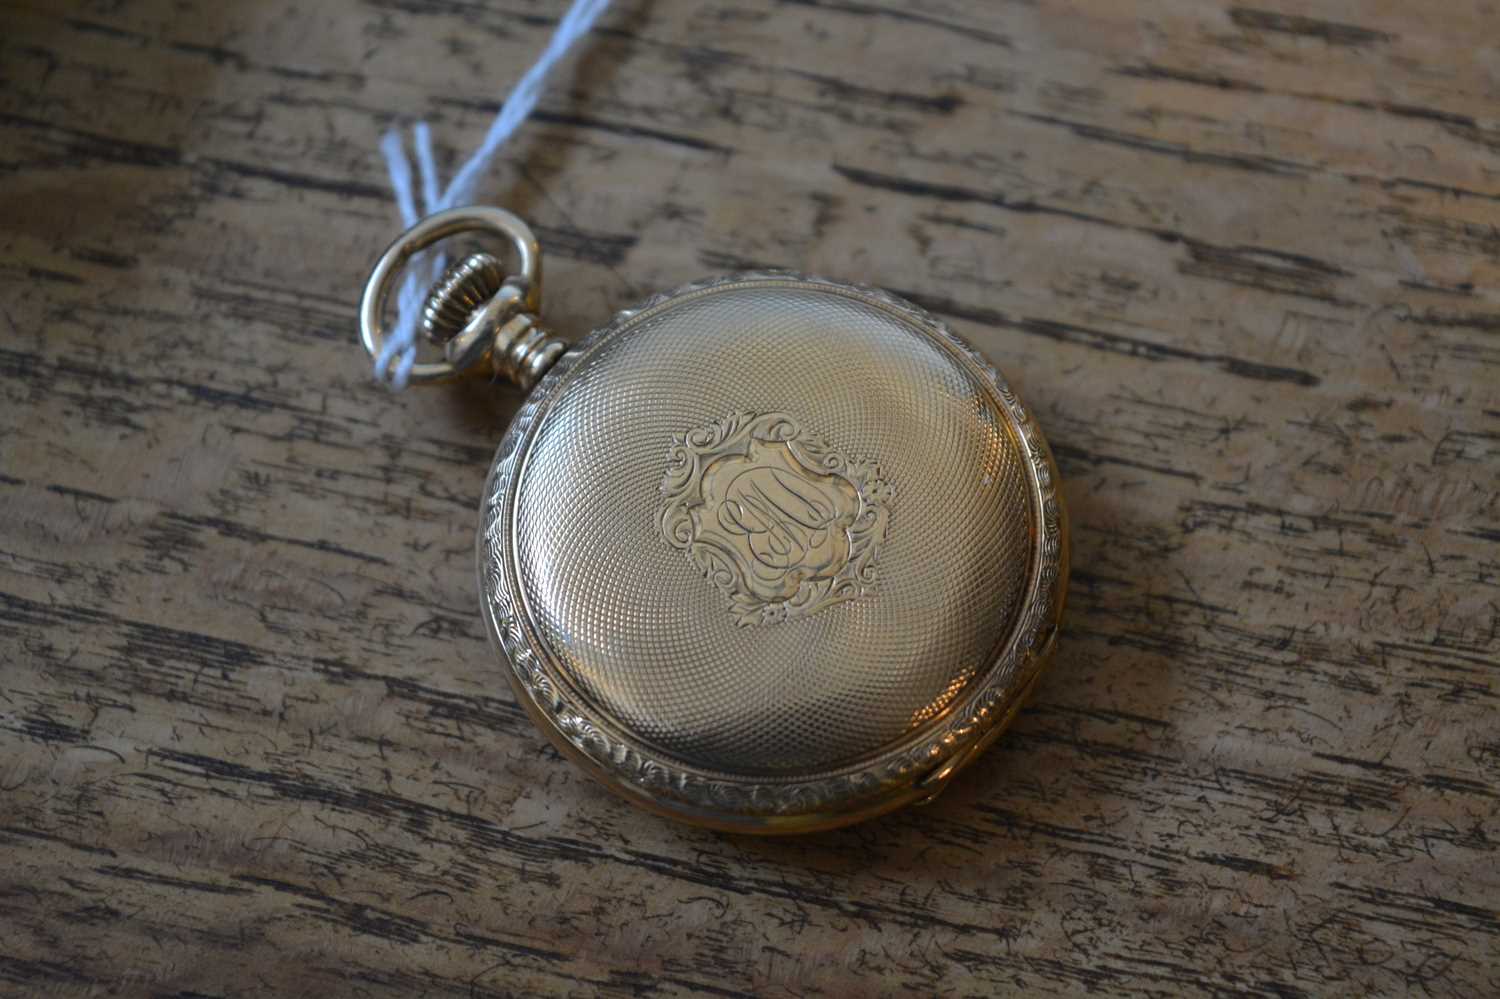 14k gold cased Waltham full hunter pocket watch the cover concealing a white enamel dial with - Image 9 of 9